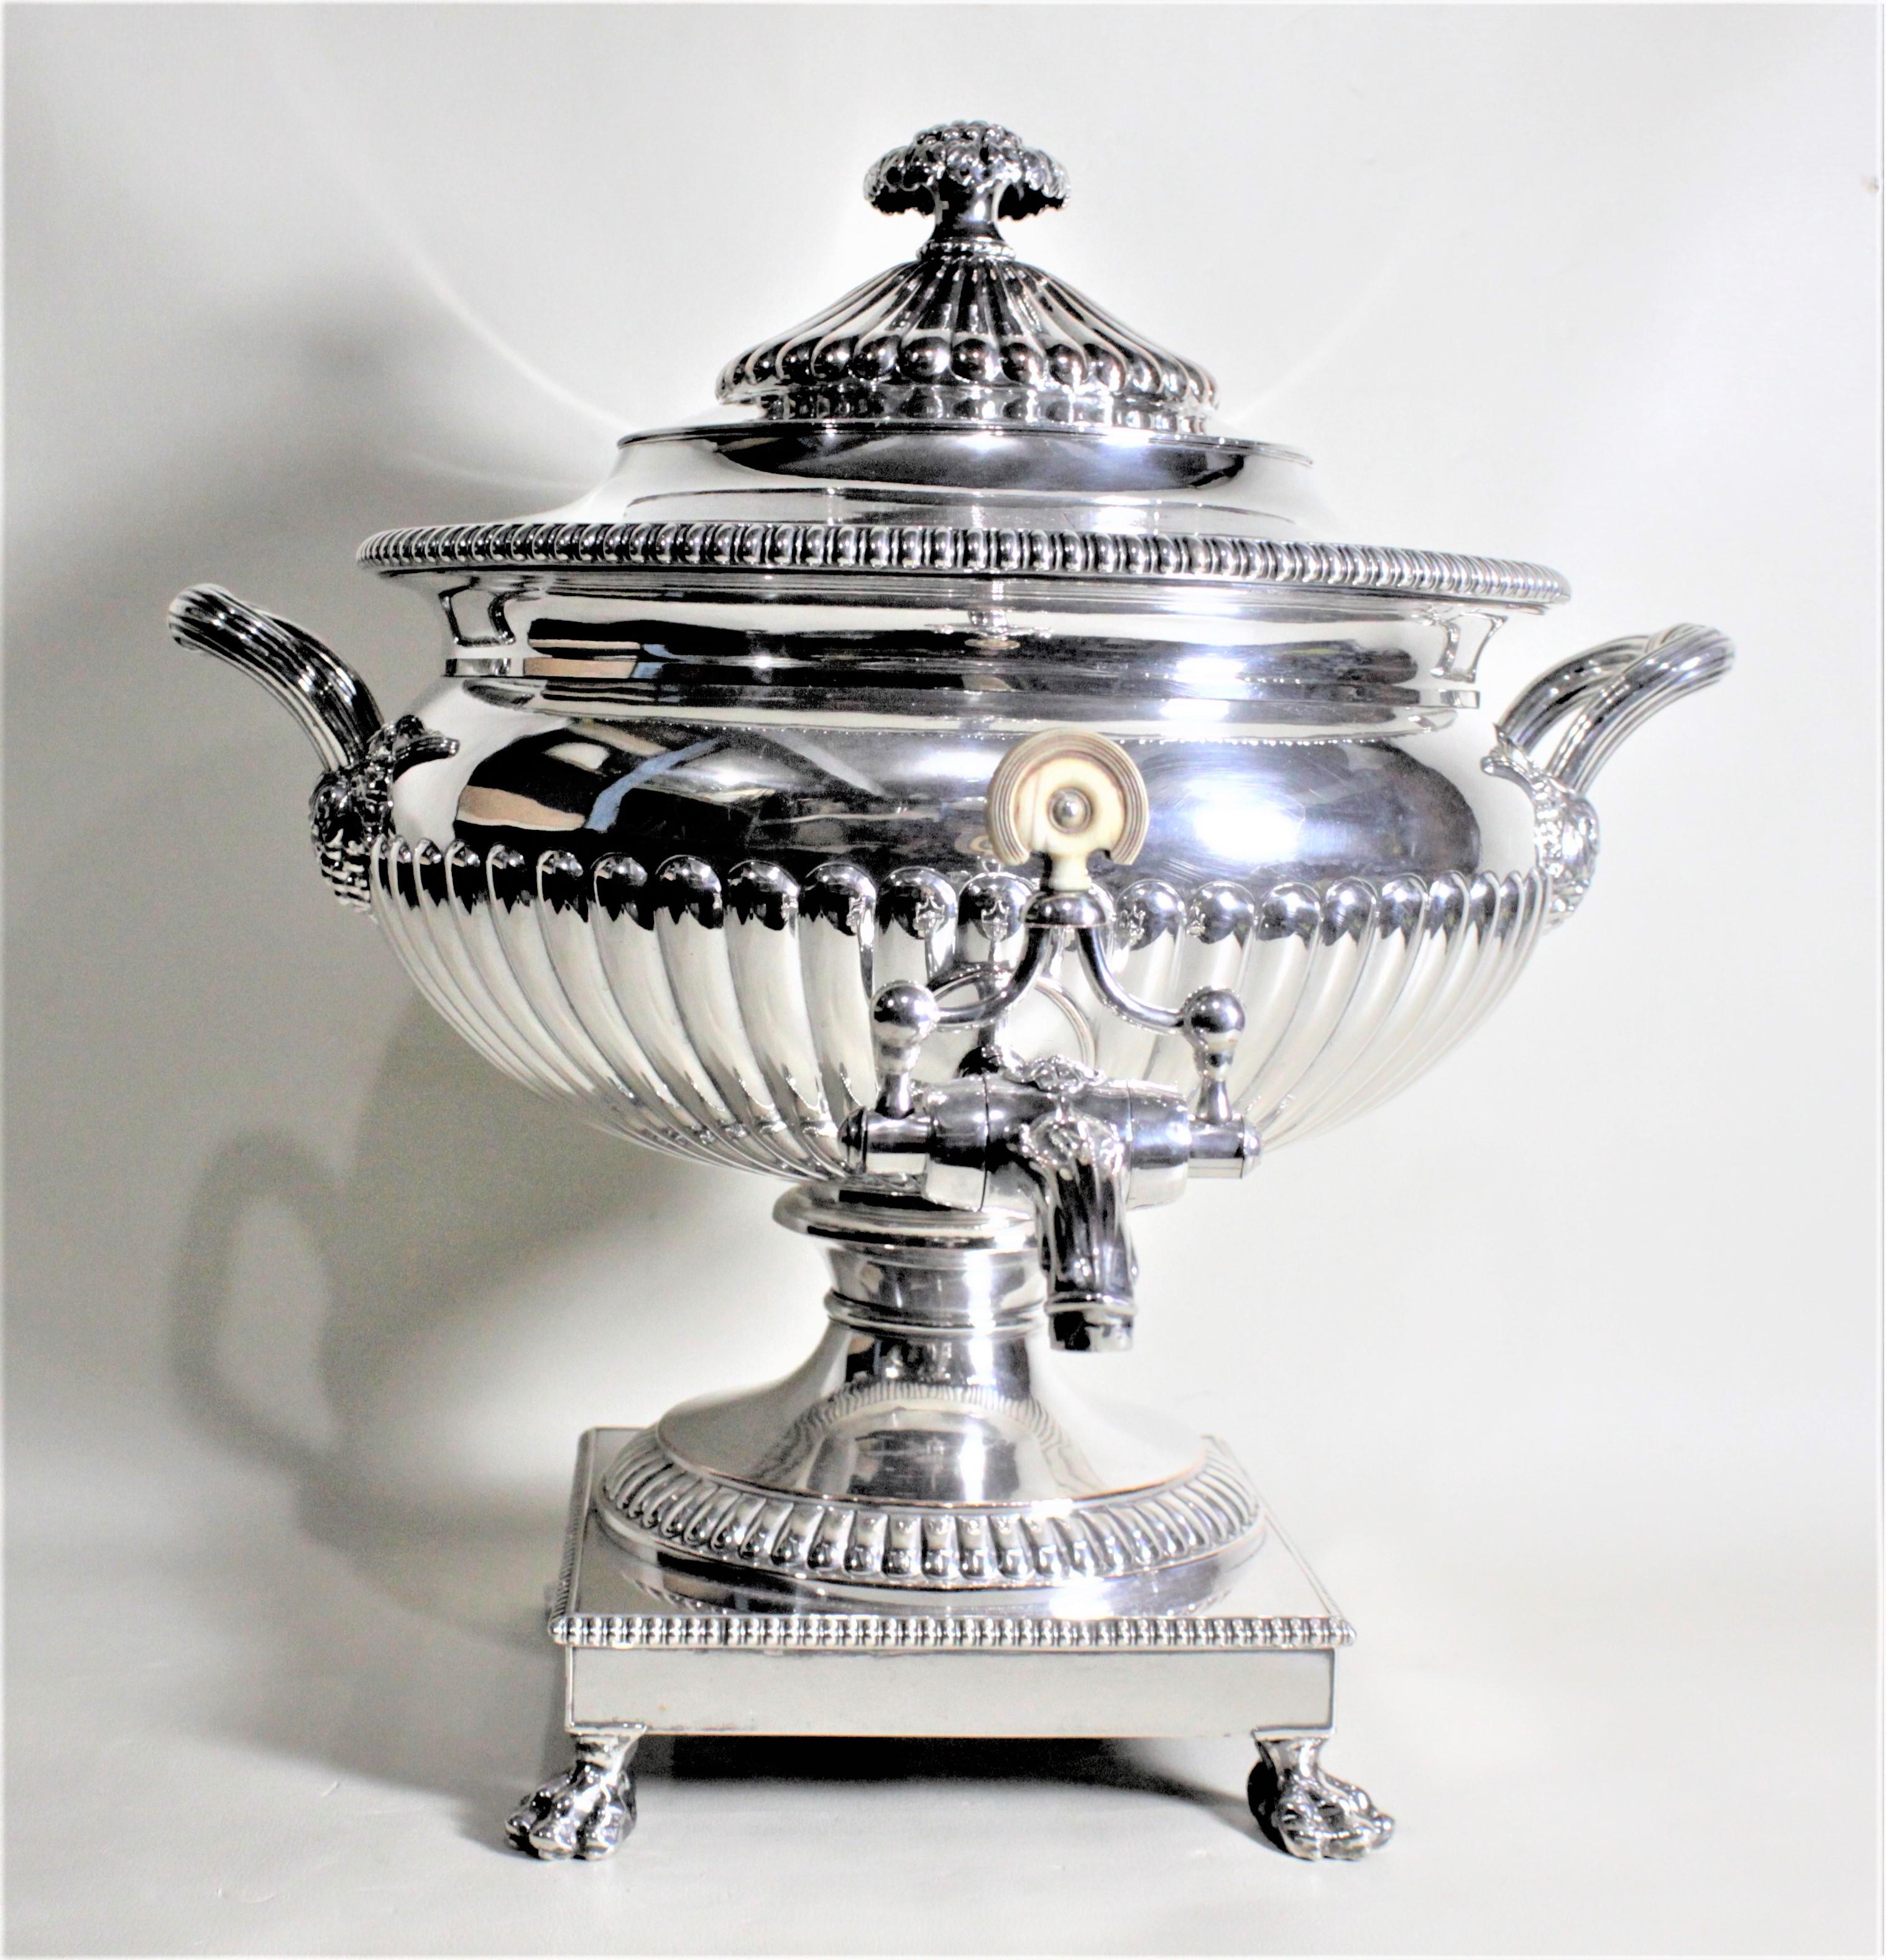 This antique silver plated hot water or coffee urn has no maker's marks but presumed to have been made in England in circa 1890 in the period Victorian style. The bowl of this urn is nicely decorated with a graduated ribbed design which is